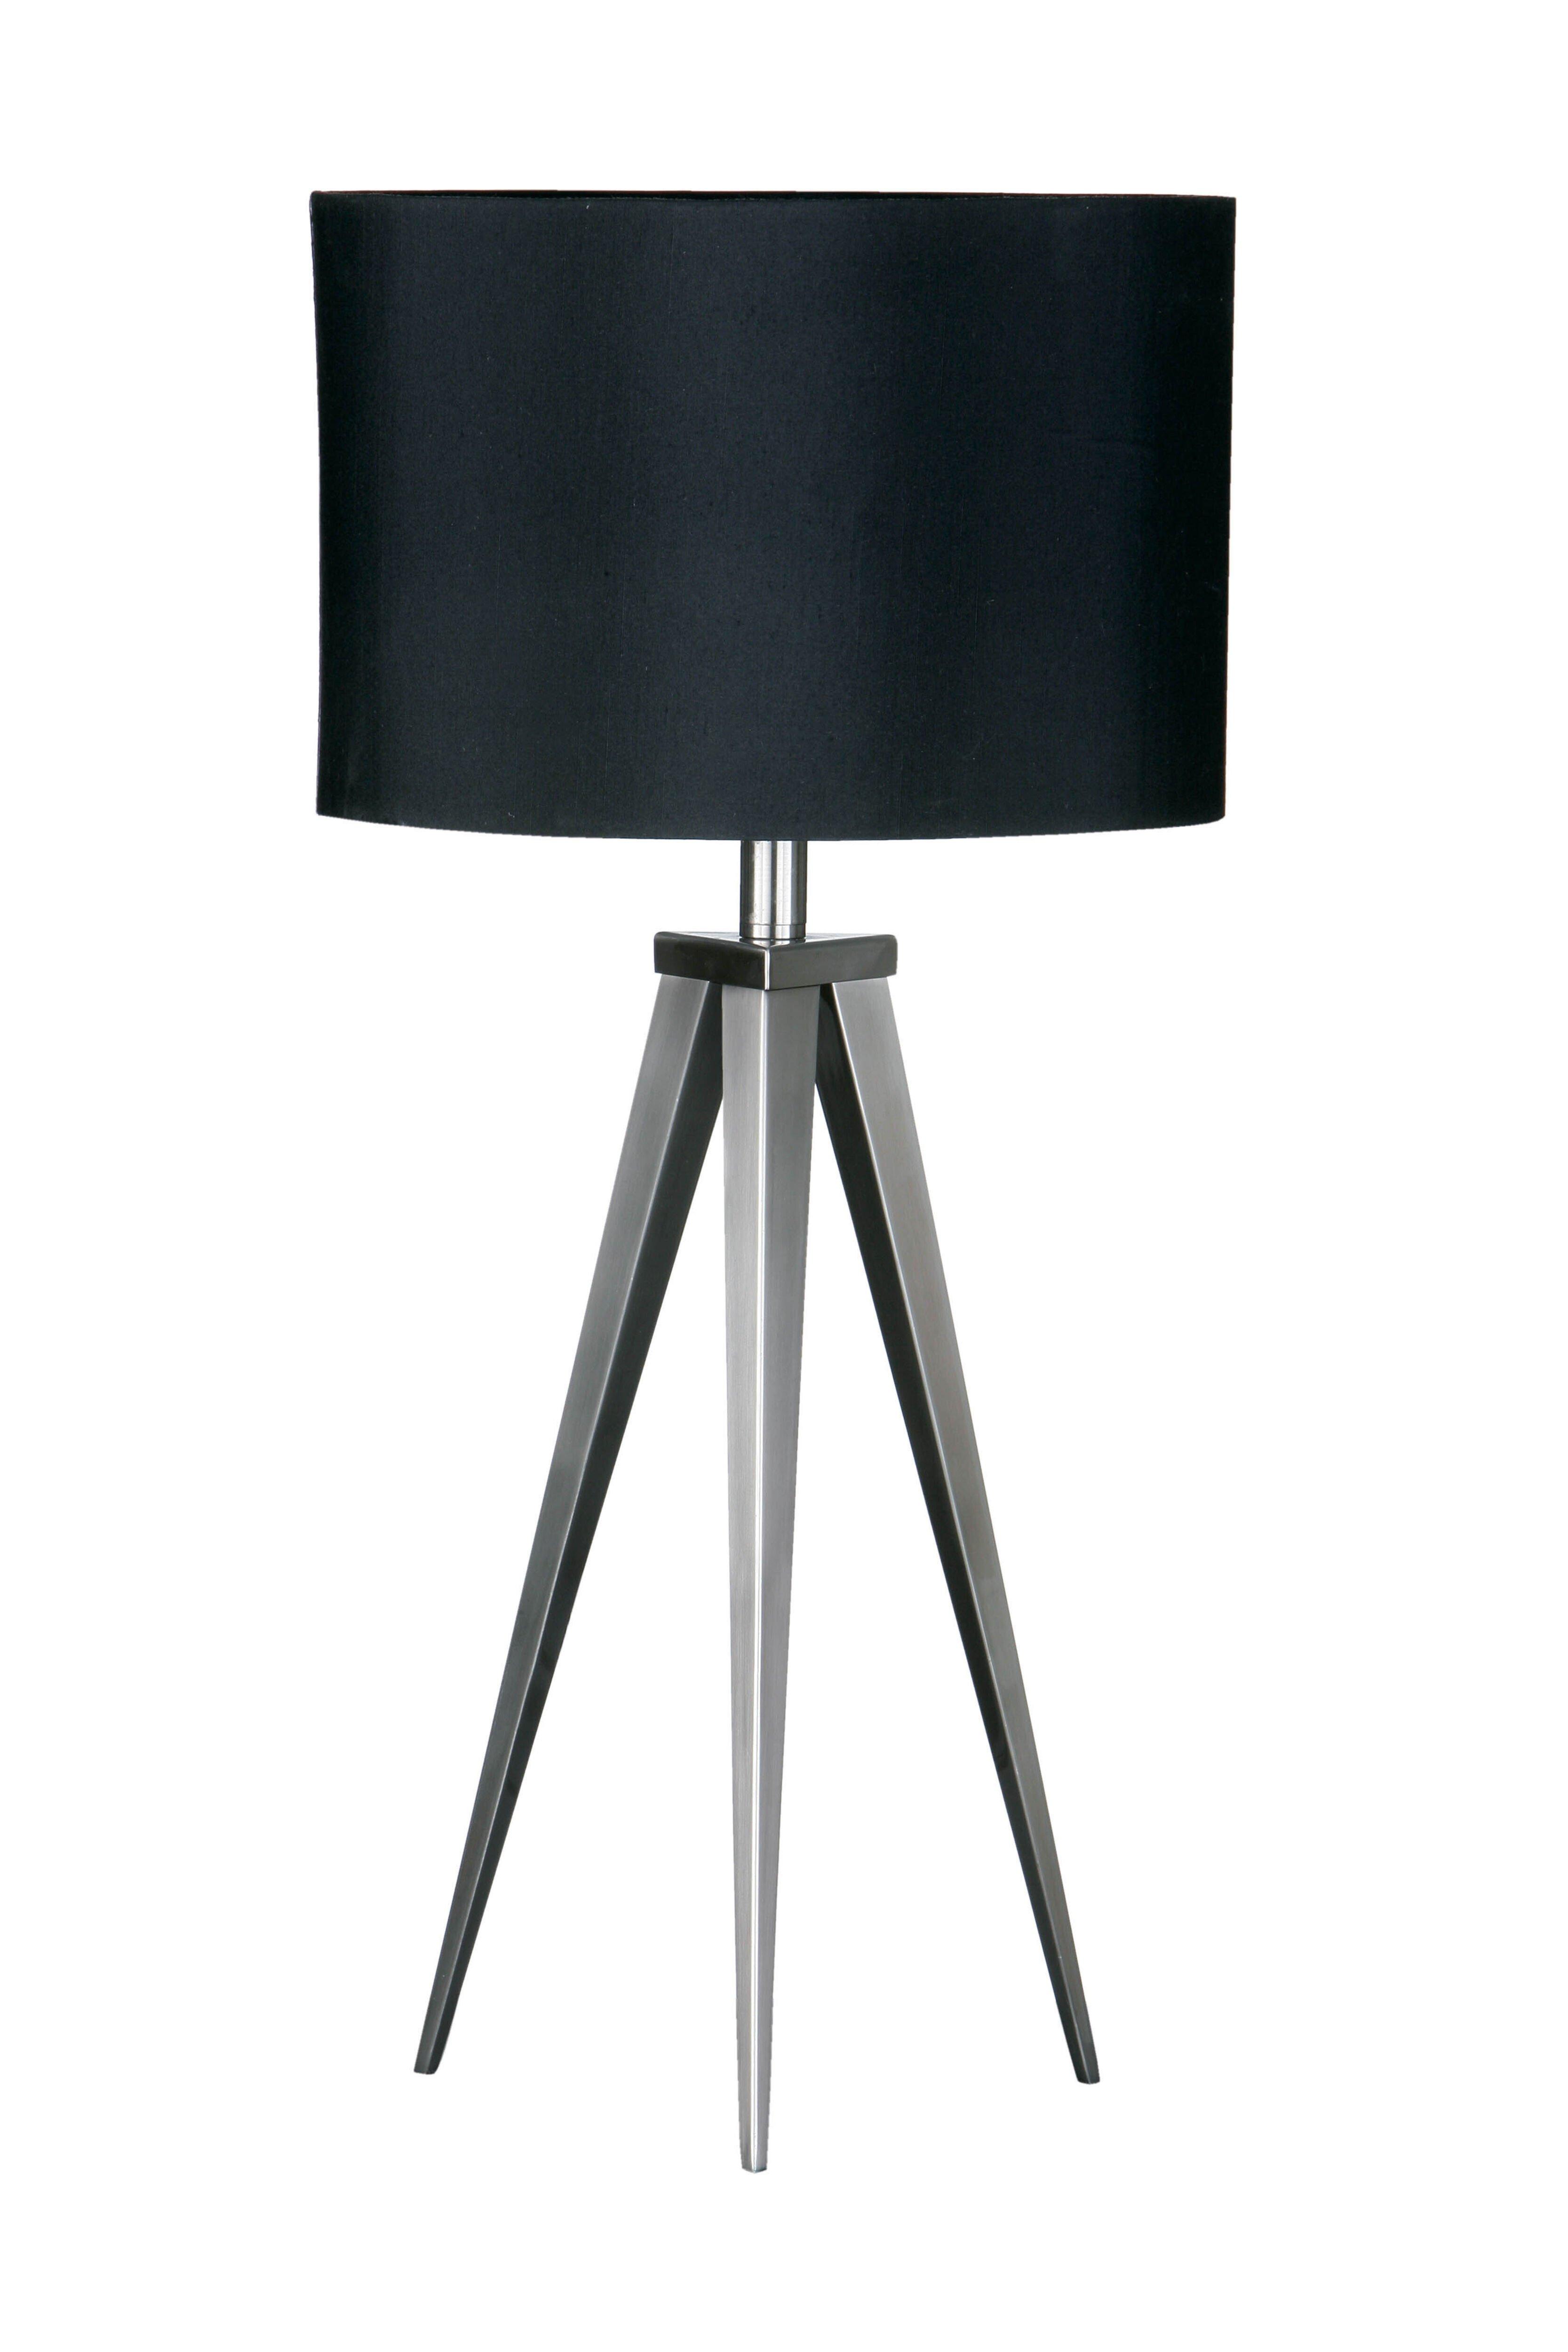 Interiors by Premier Tripod Feature Lamp